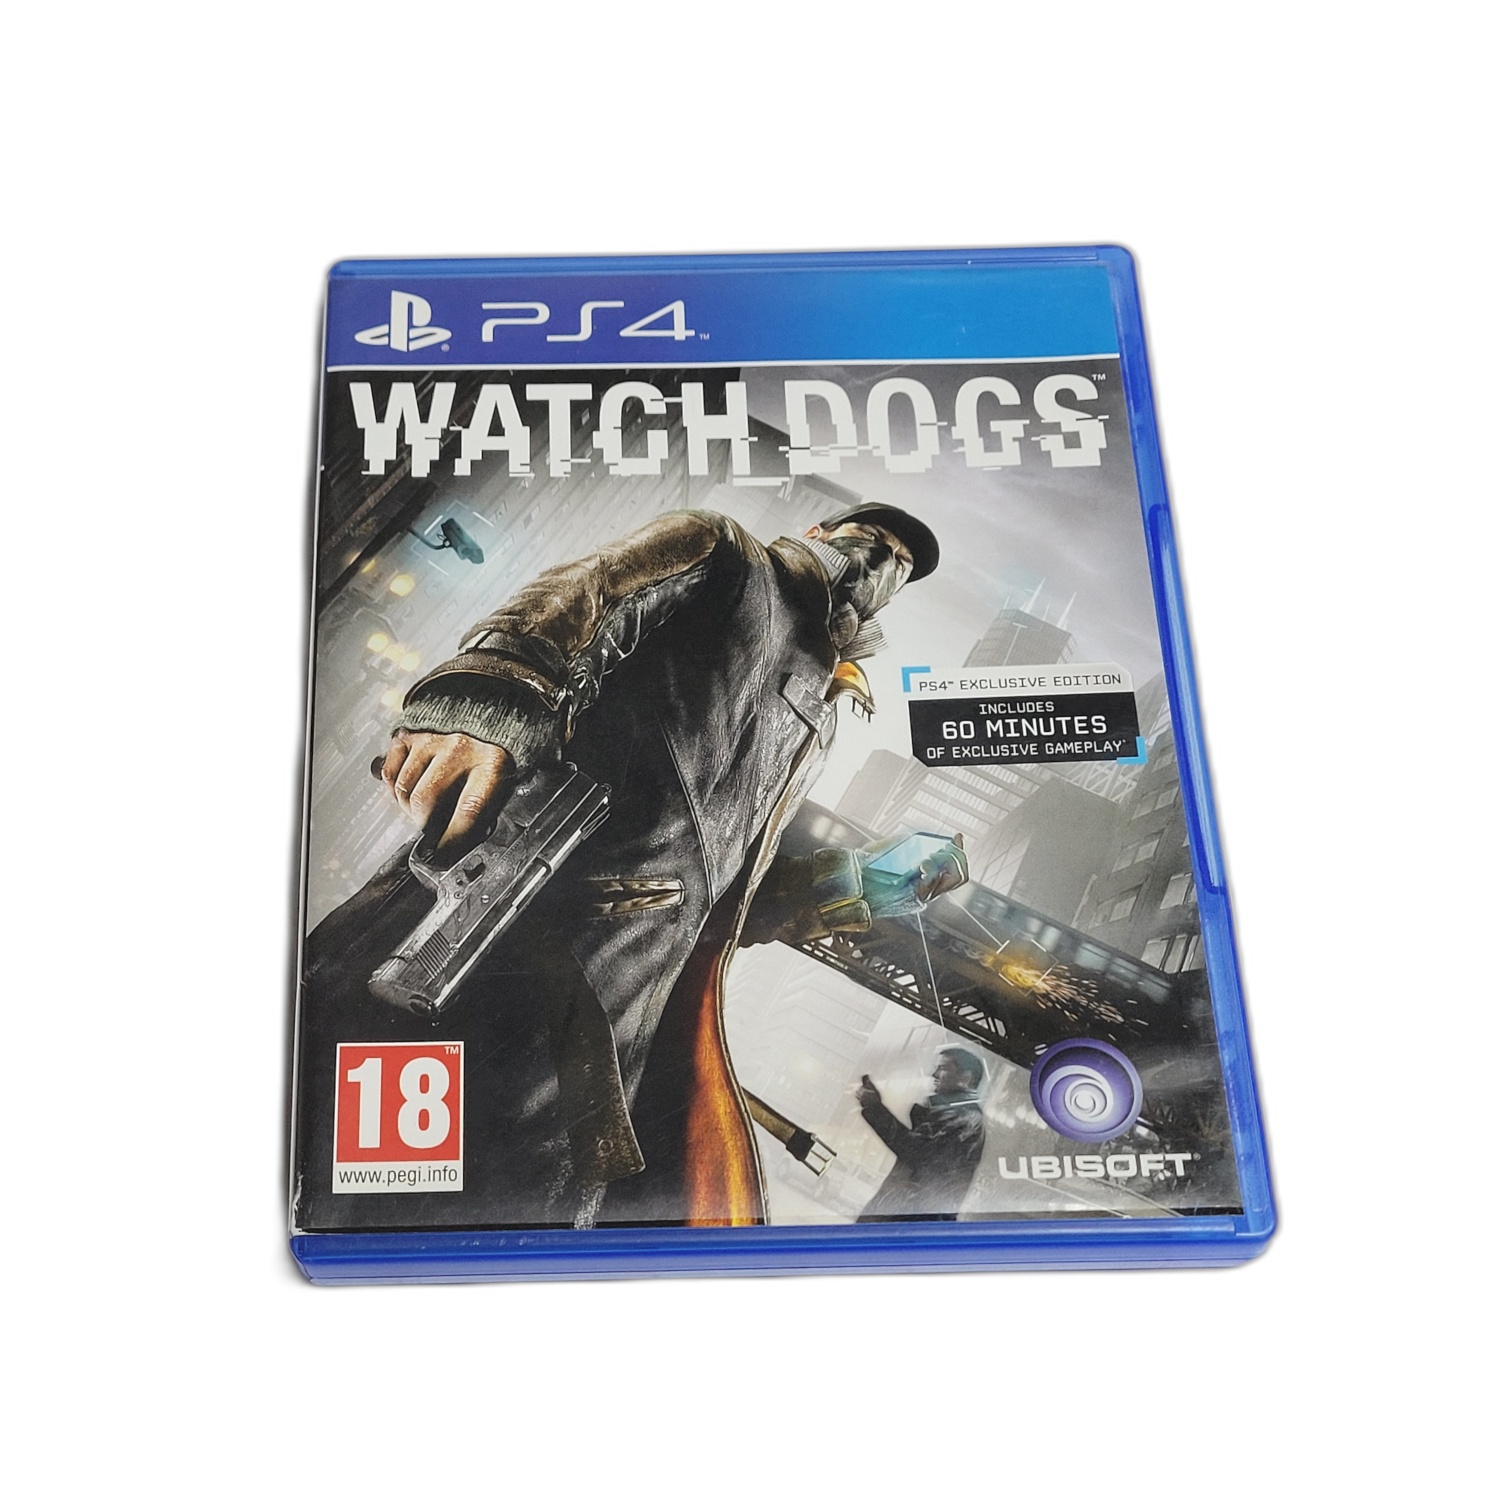 Watch Dogs PS4 - Action-Adventure Hacker Epic, Brand New & Sealed